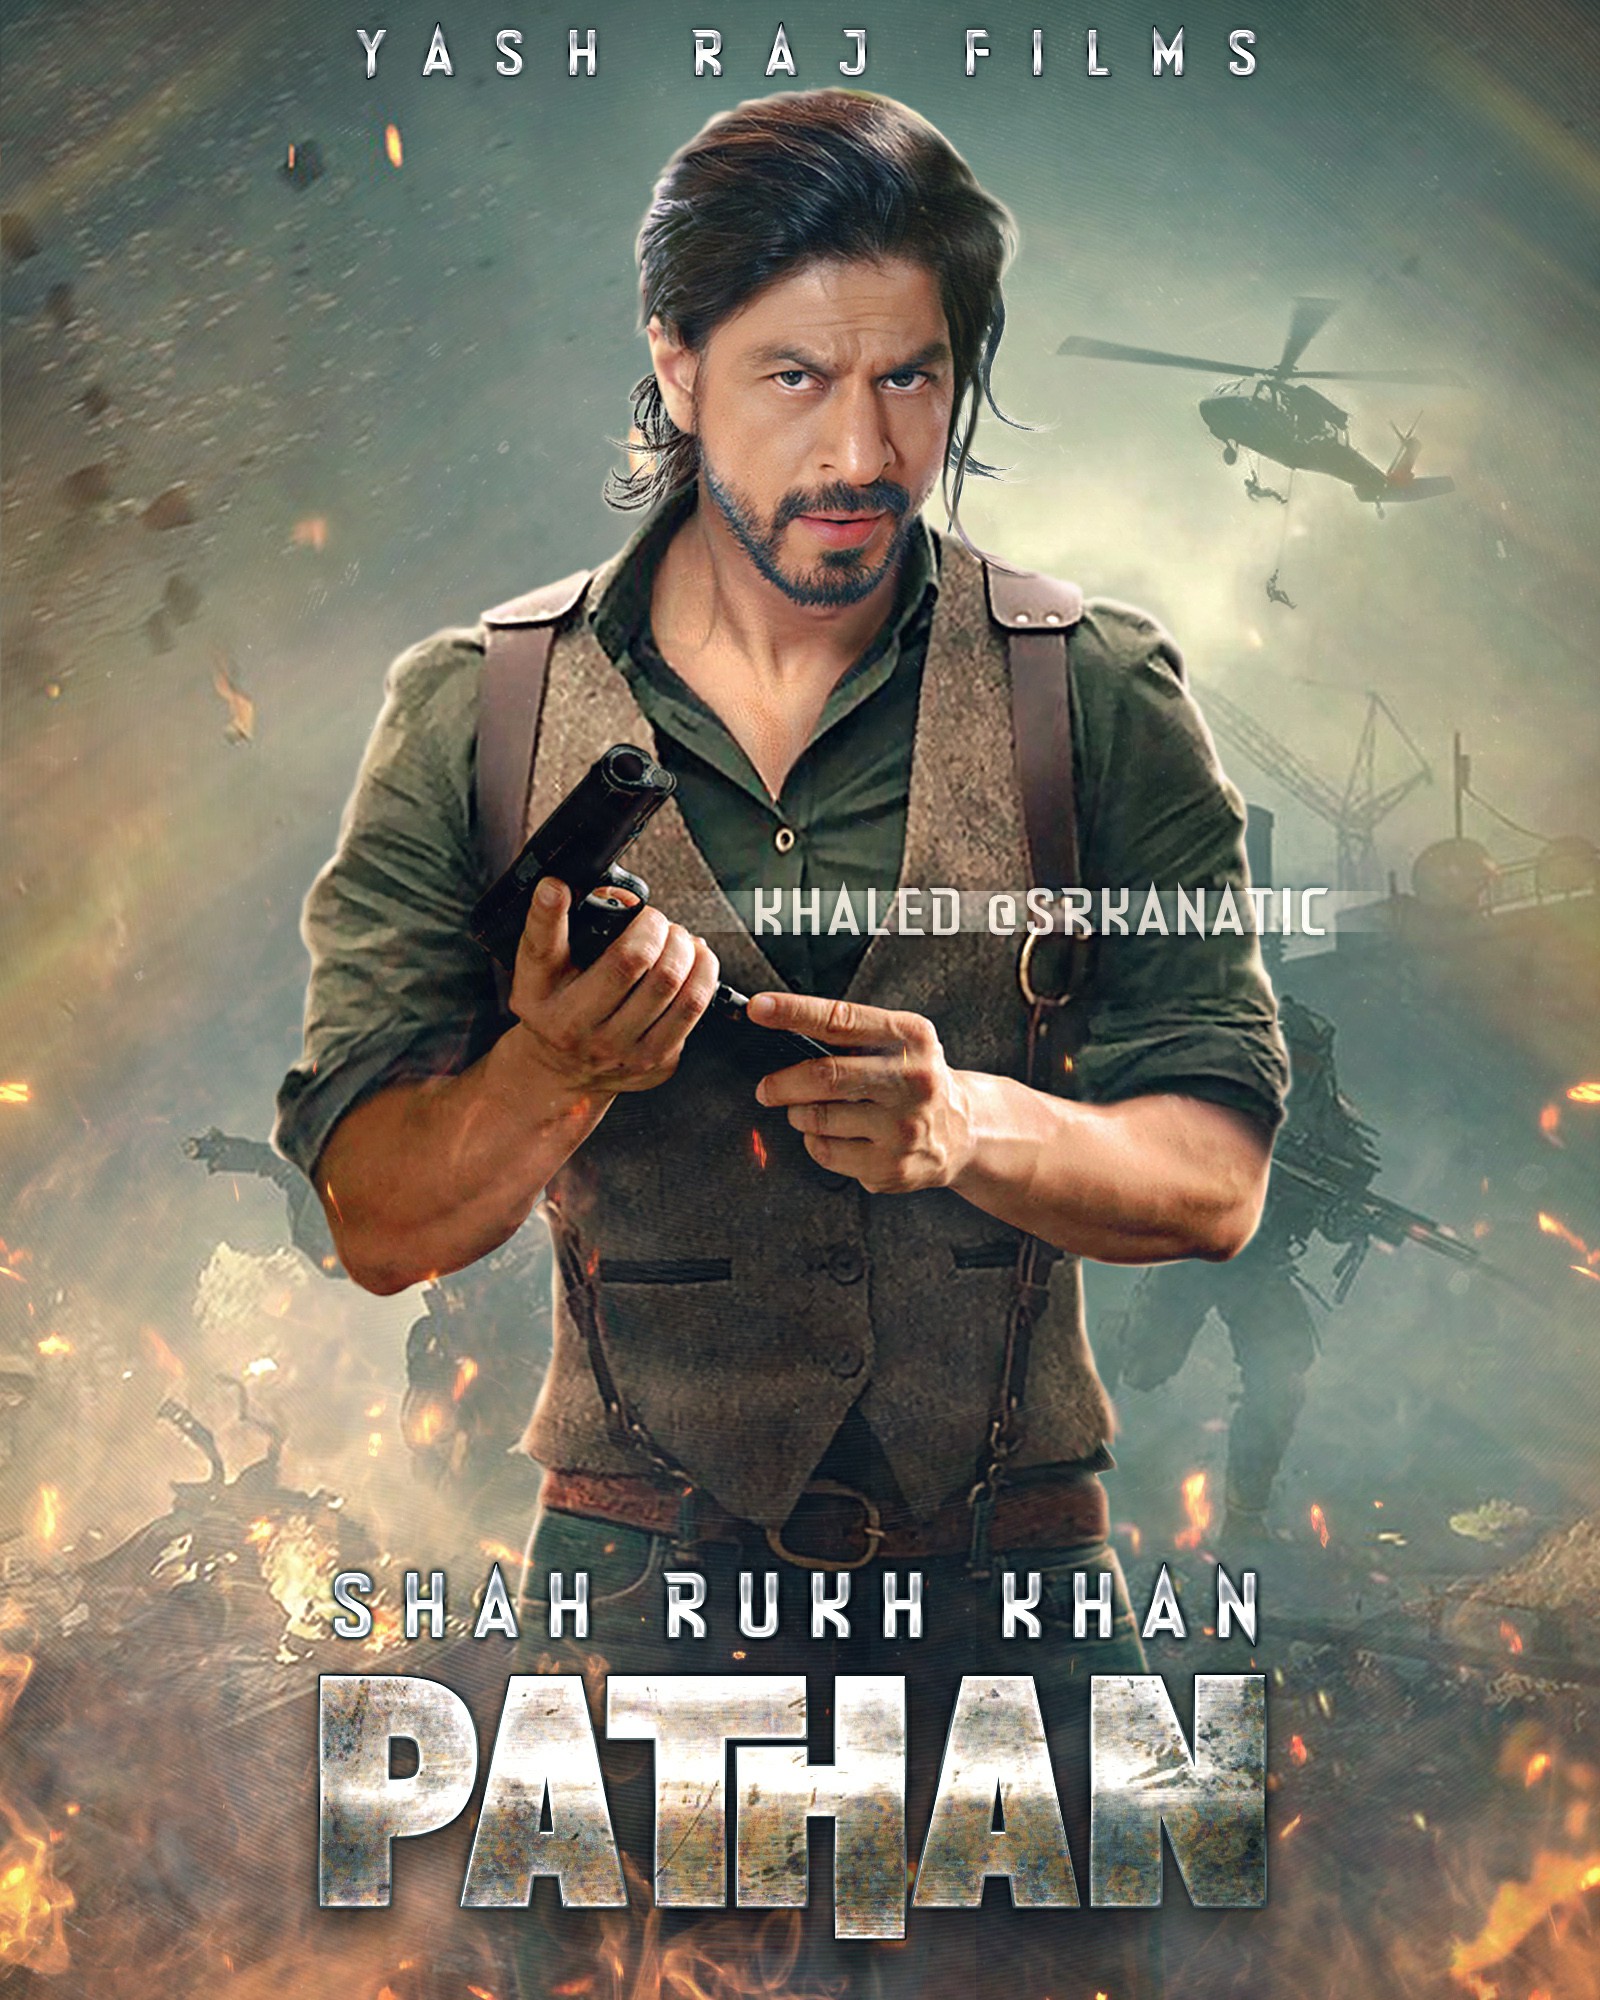 Khaled SRKanatic on Twitter: "Here is my latest #Pathan poster, I hope it lives up to your expectations. https://t.co/zNR68R8o81 https://t.co/XTY0kXMzoM" / Twitter